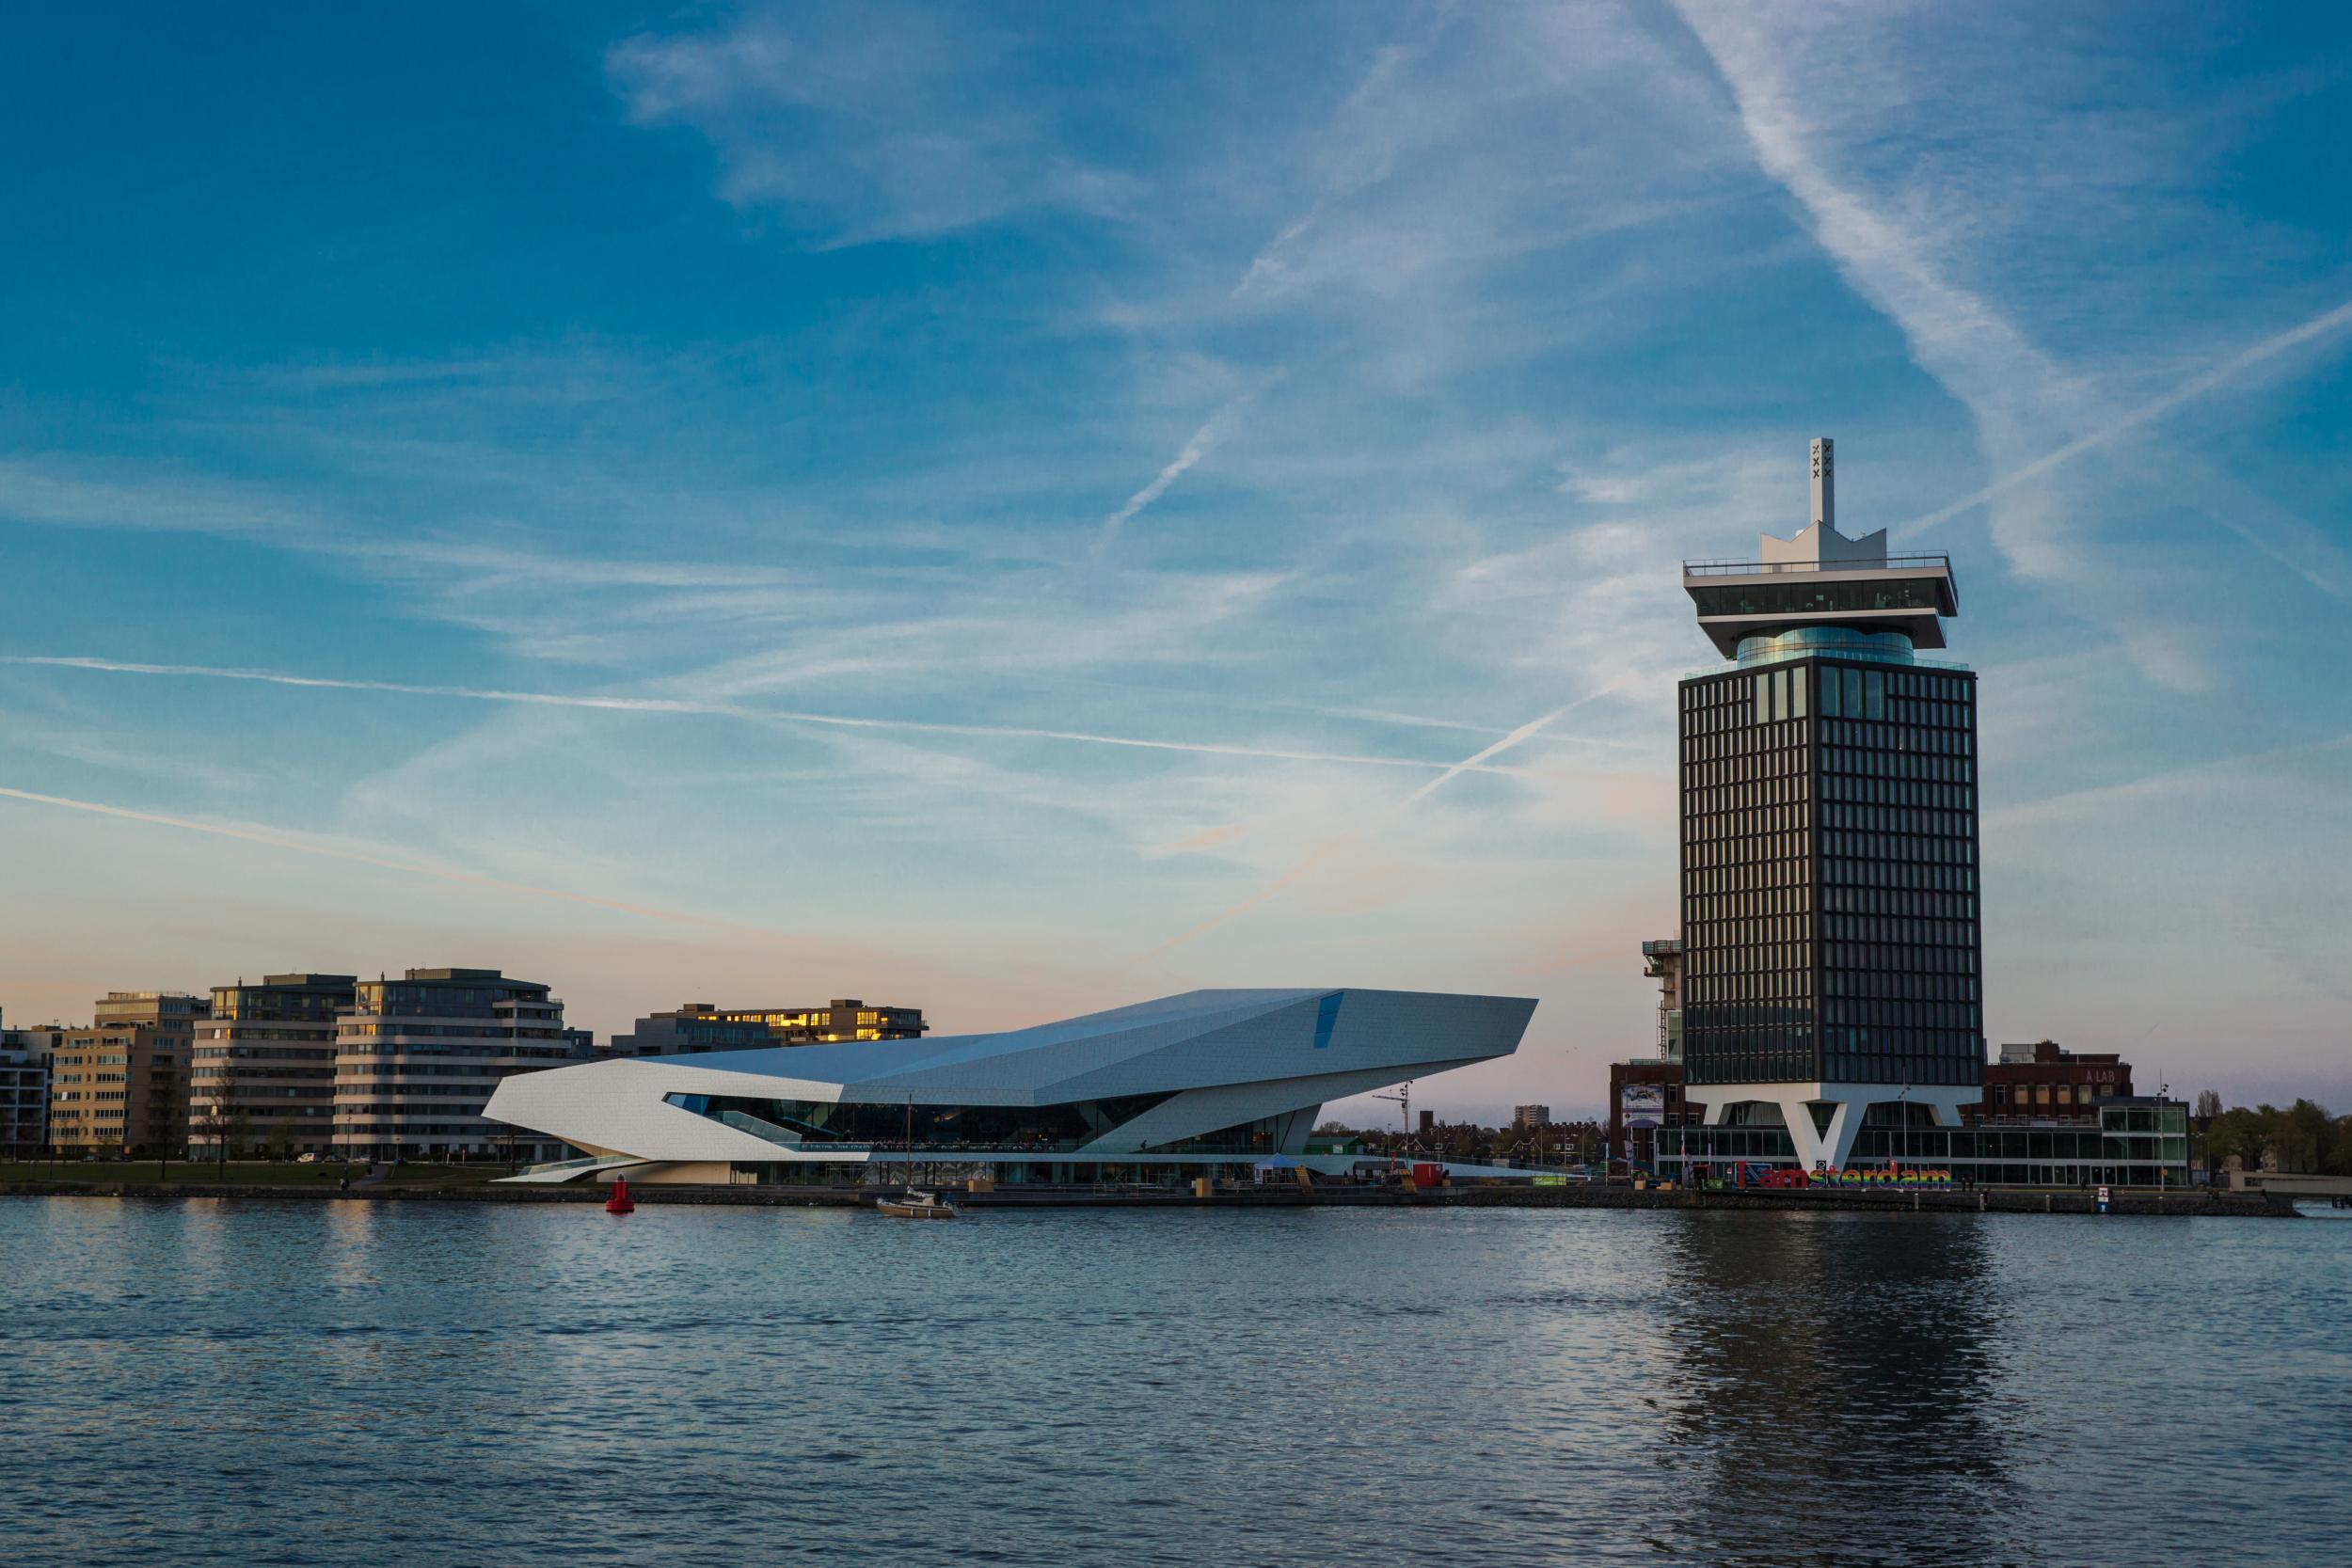 Amsterdam-Noord has gone from industrial to innovative